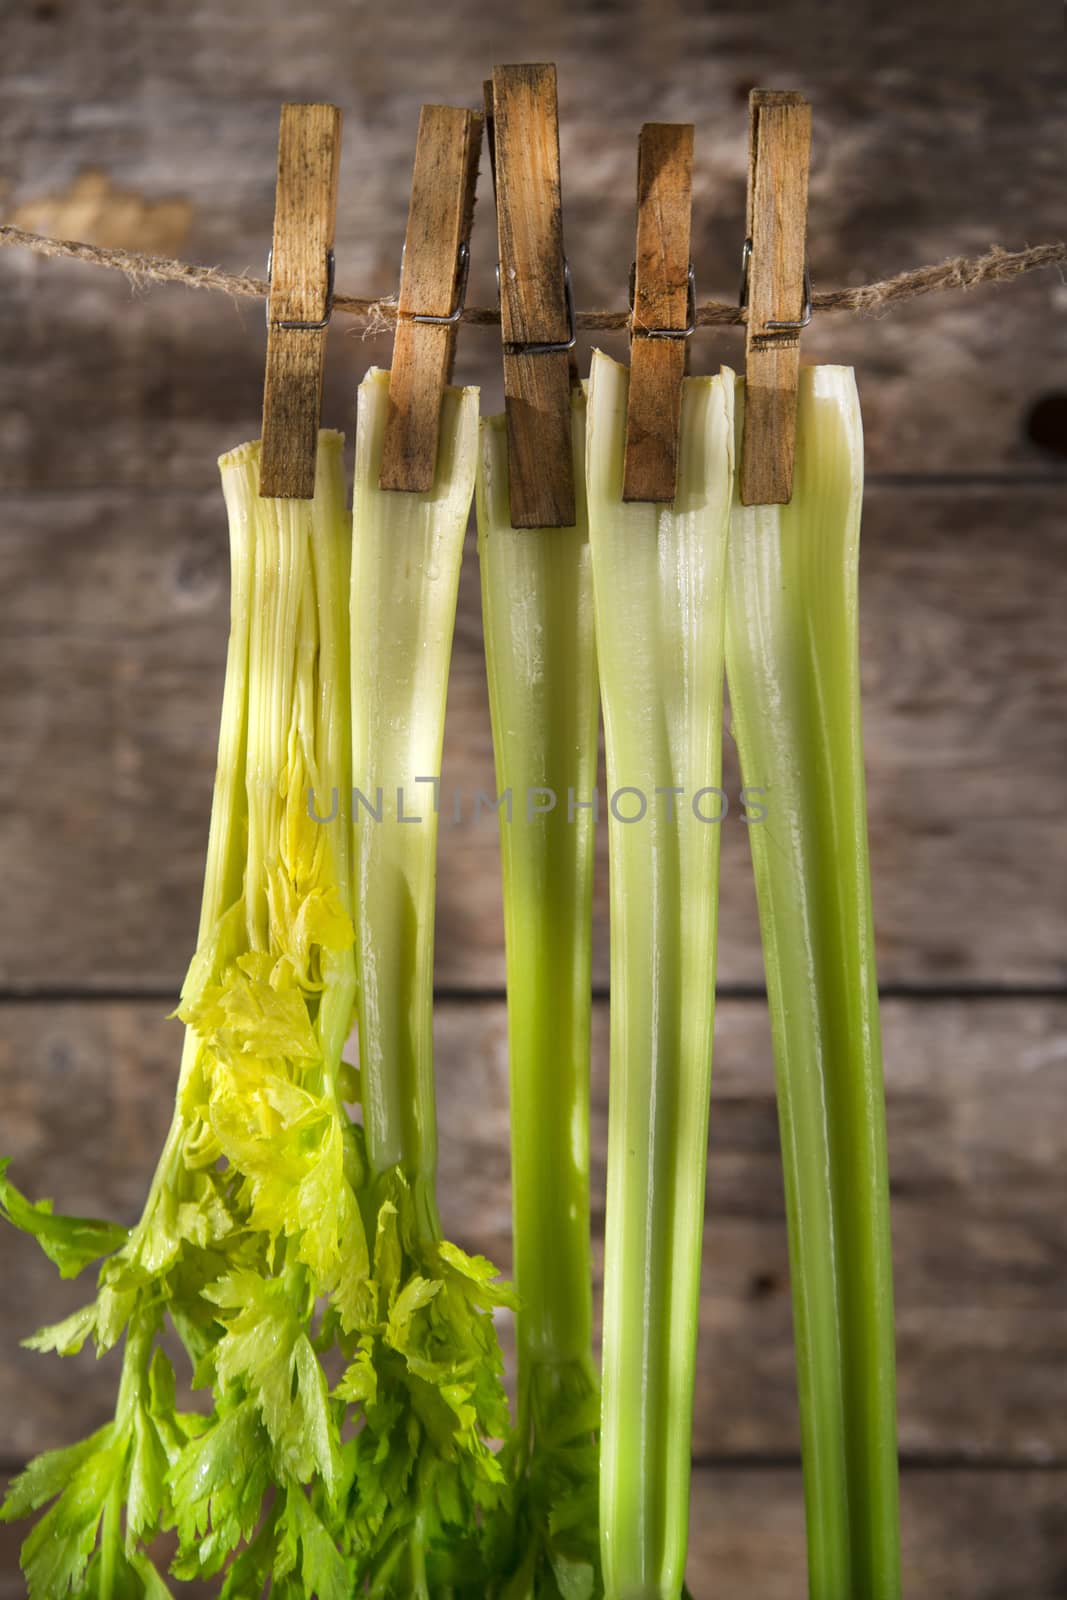 Product of the garden, fresh celery ready for use in the kitchen